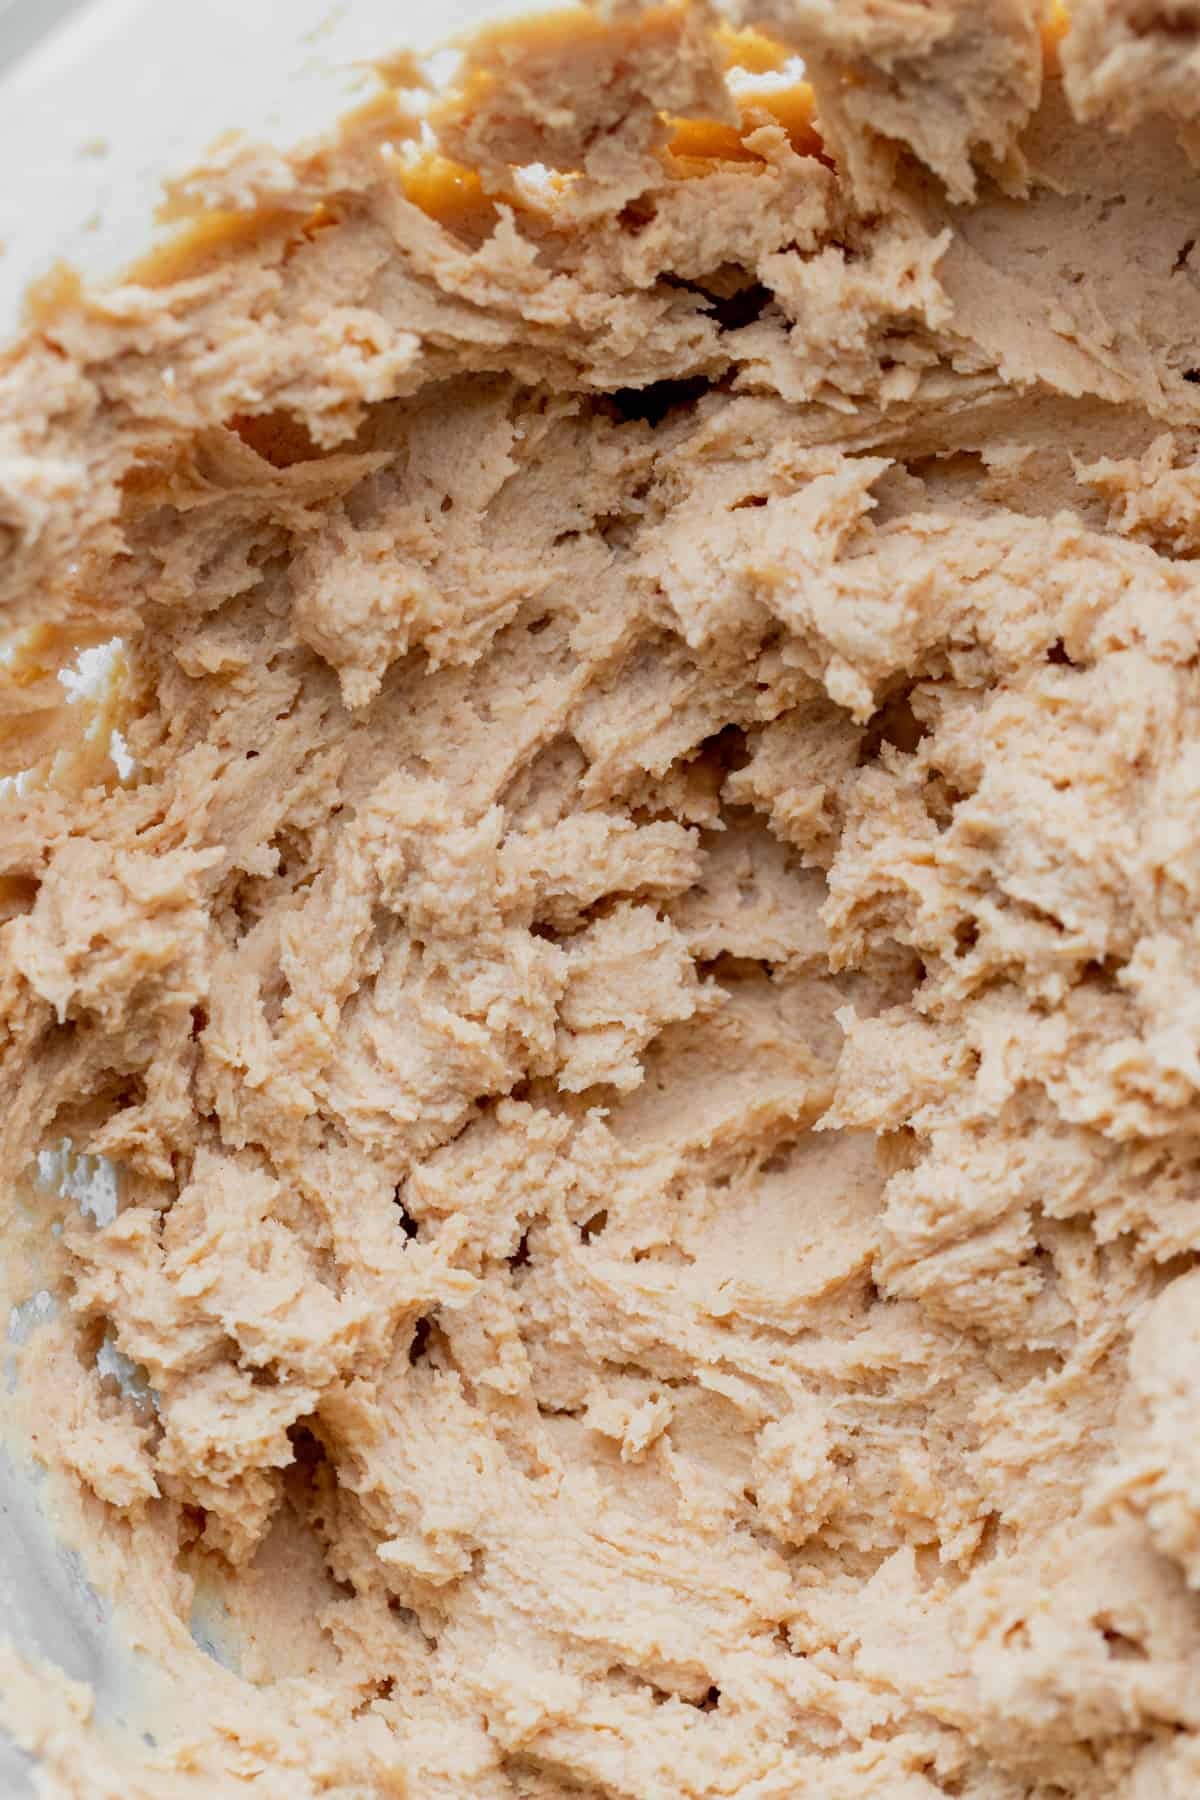 Beaten cream cheese and peanut butter in a bowl.